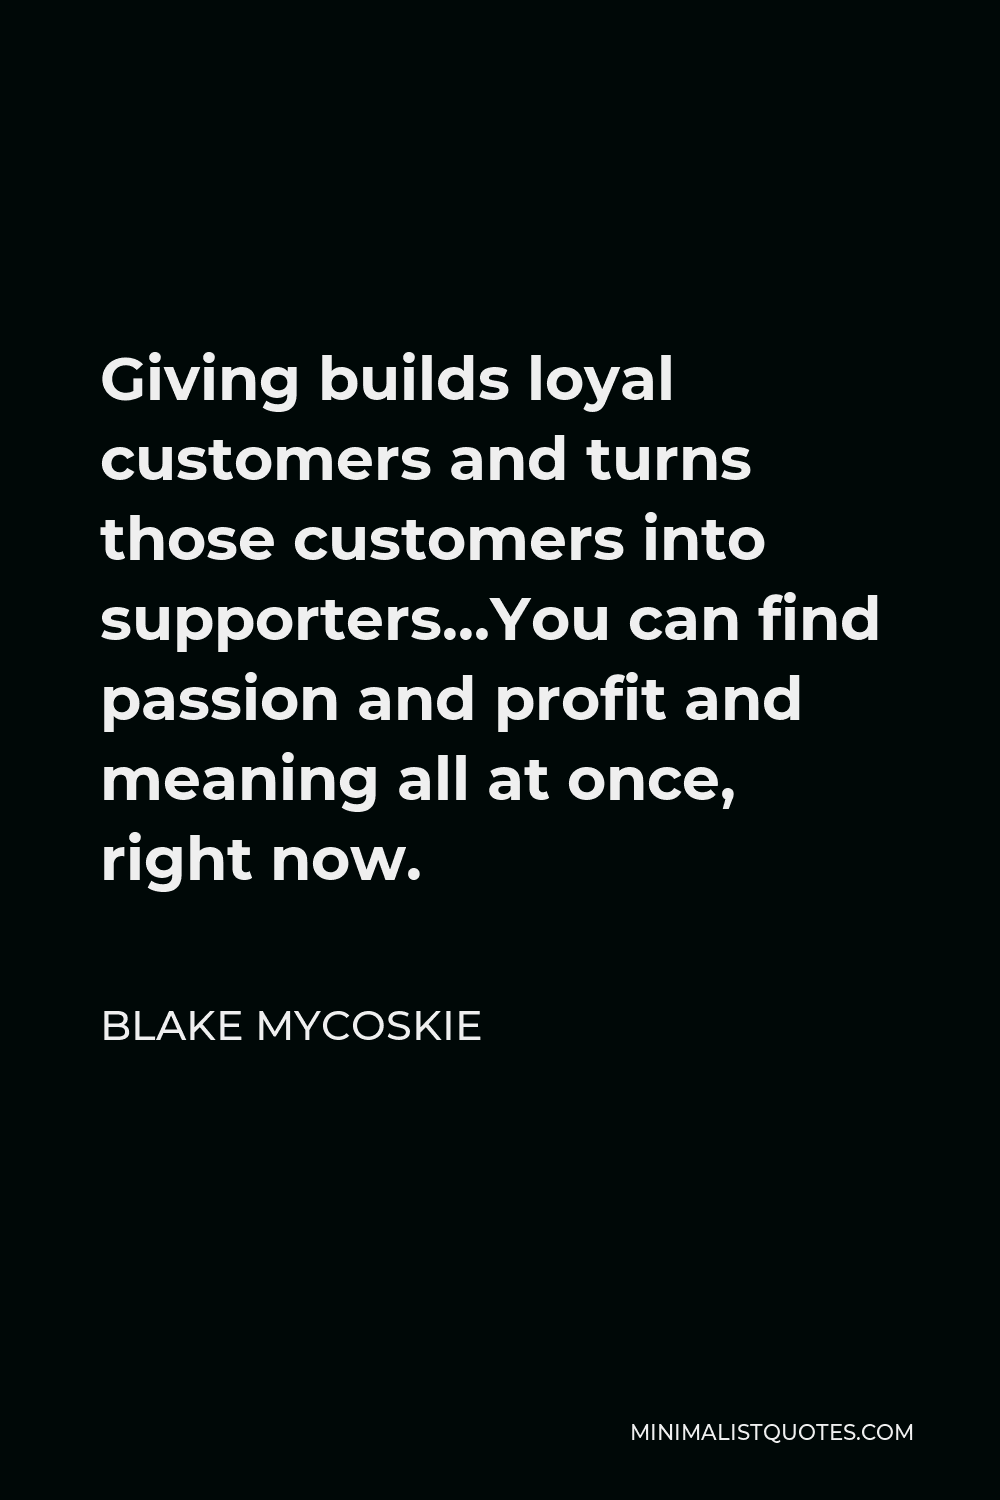 Blake Mycoskie Quote - Giving builds loyal customers and turns those customers into supporters…You can find passion and profit and meaning all at once, right now.